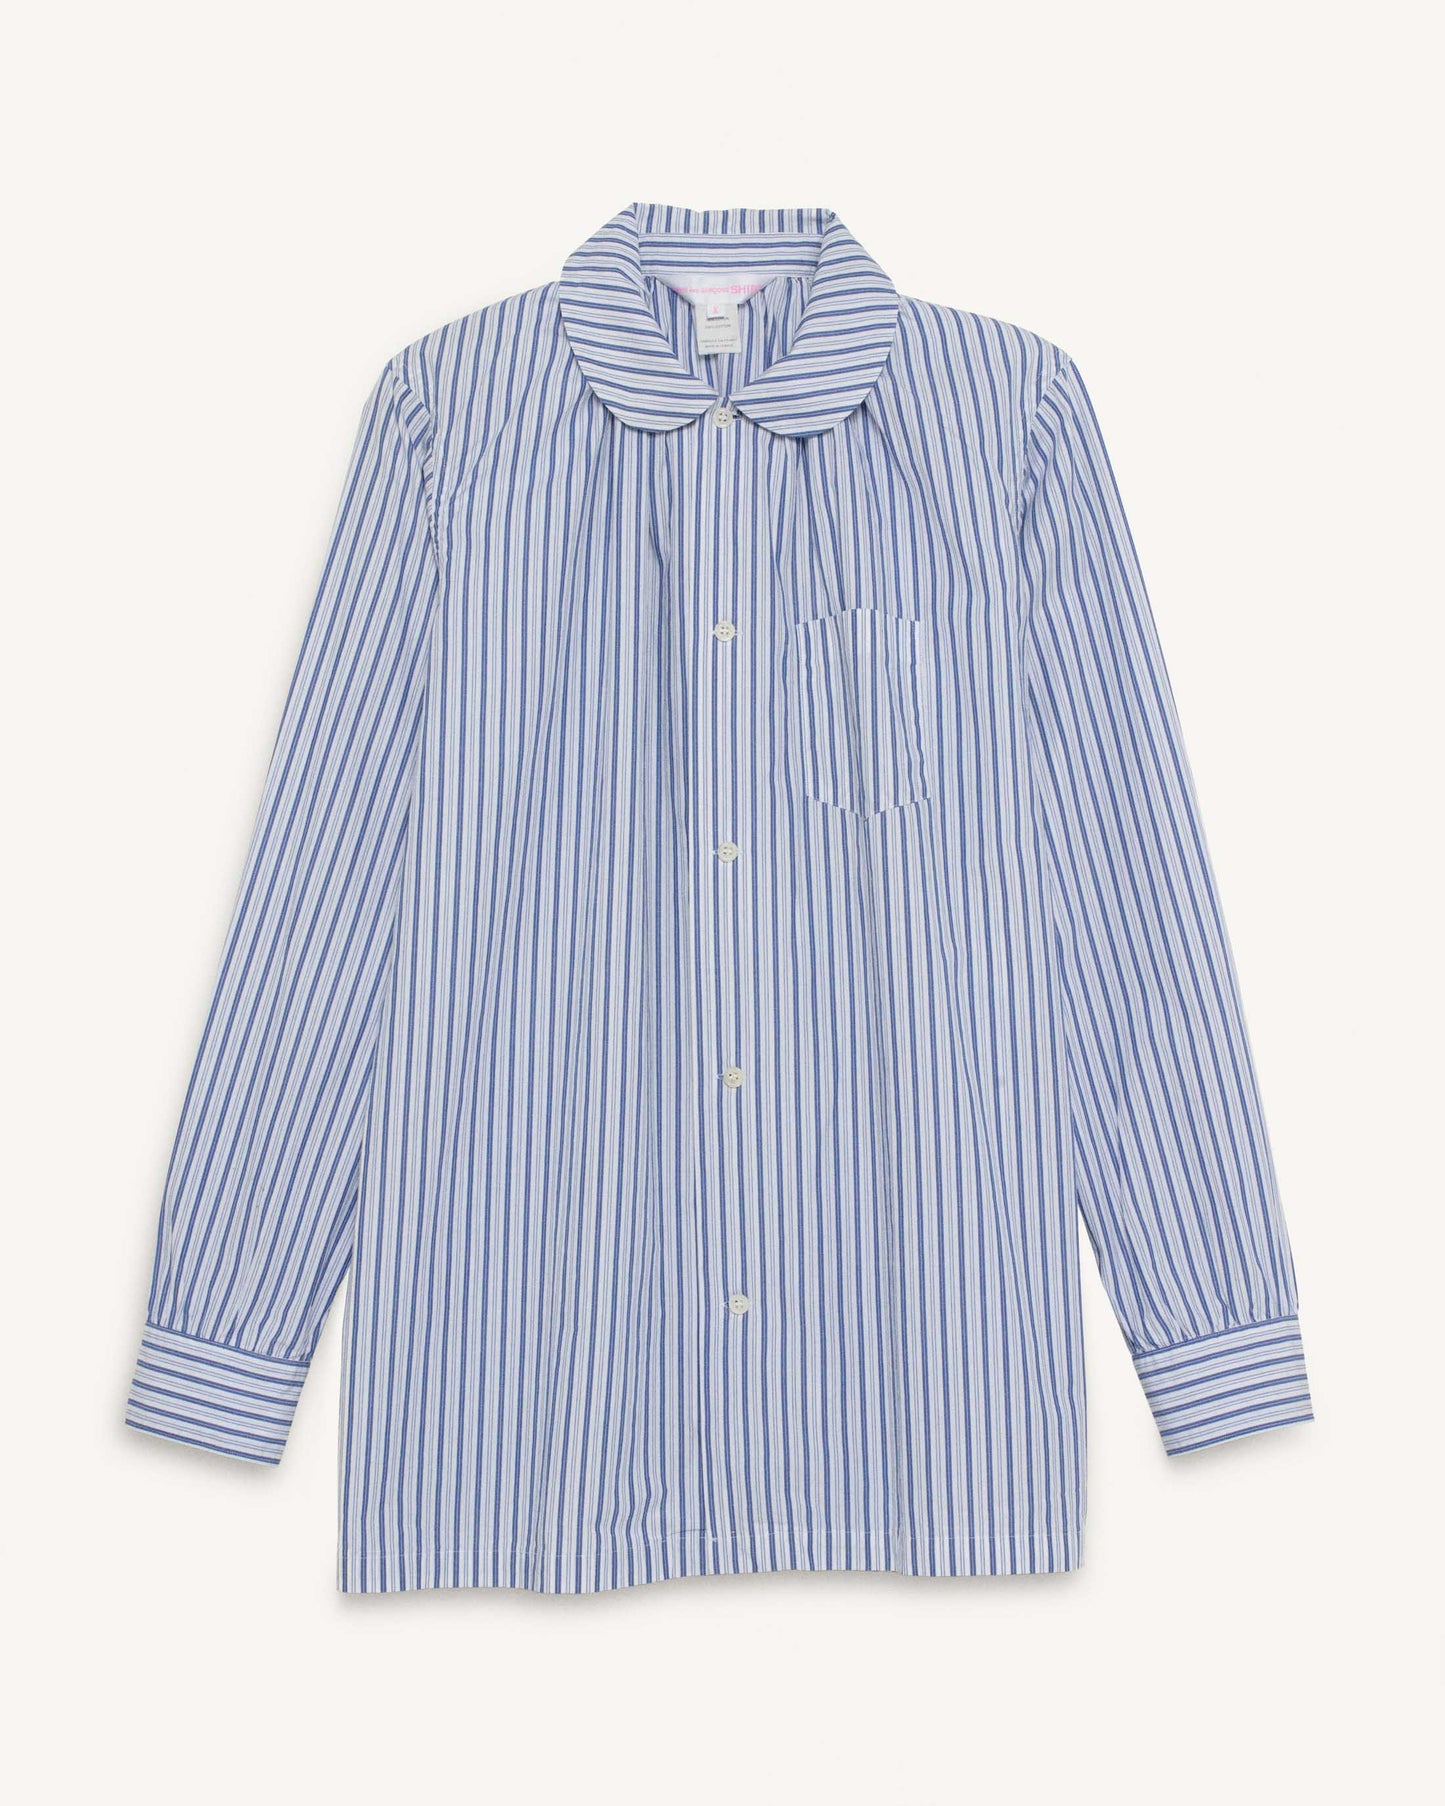 FALLON-shirt-comme des garçons-white-blue-stripped-vintage-women-luxury-clothing-rare-fashion-curated-art